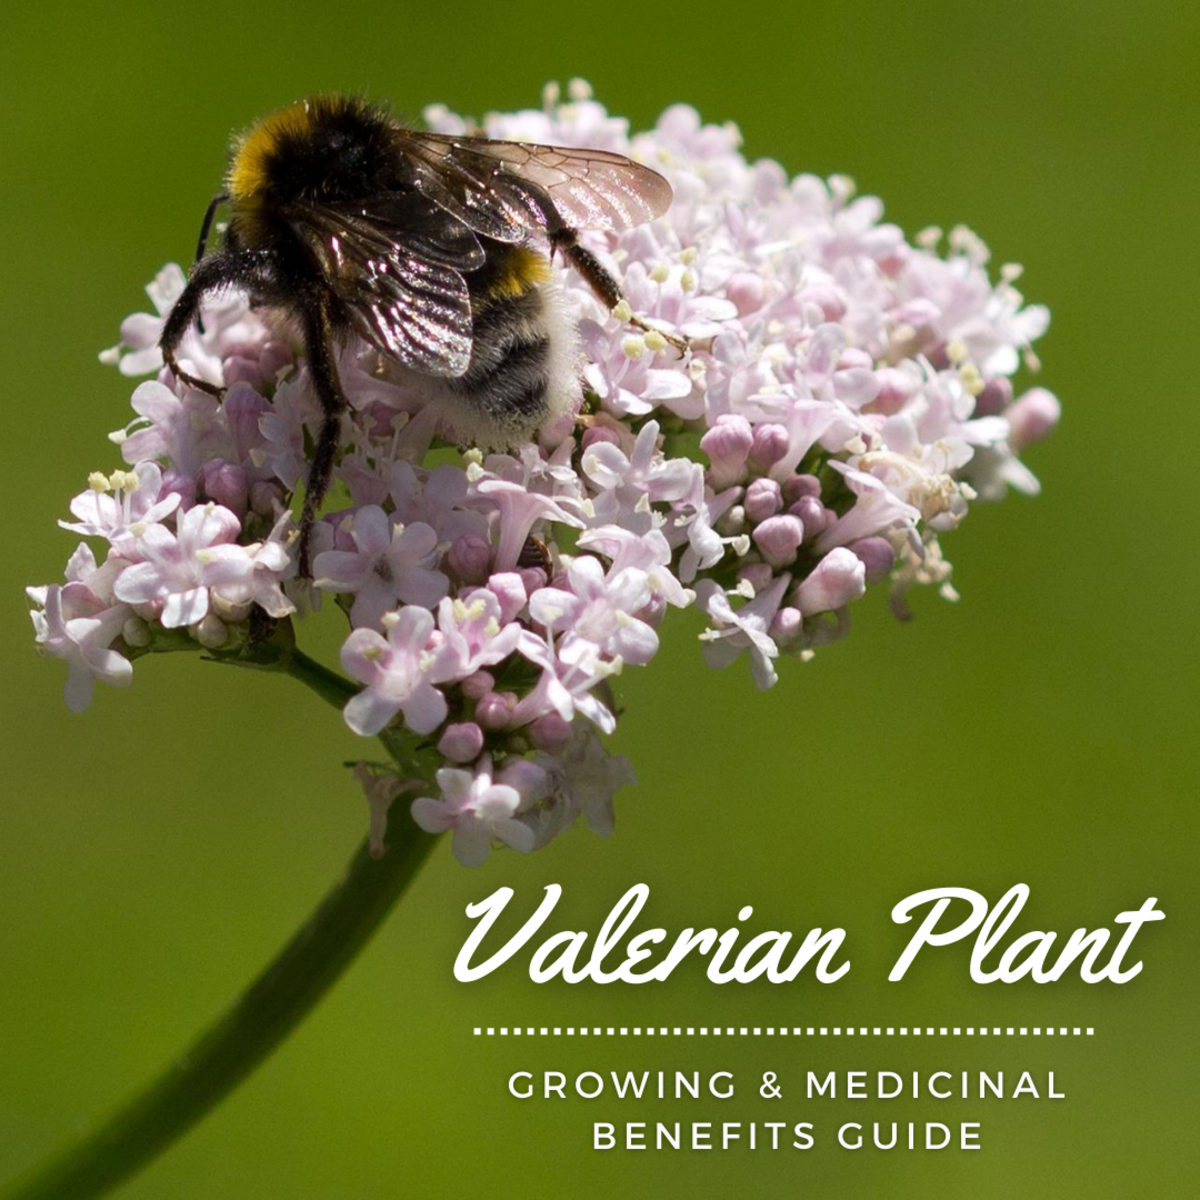 This guide will provide information on how to grow valerian, as well as look into the potential medicinal benefits the plant may offer.